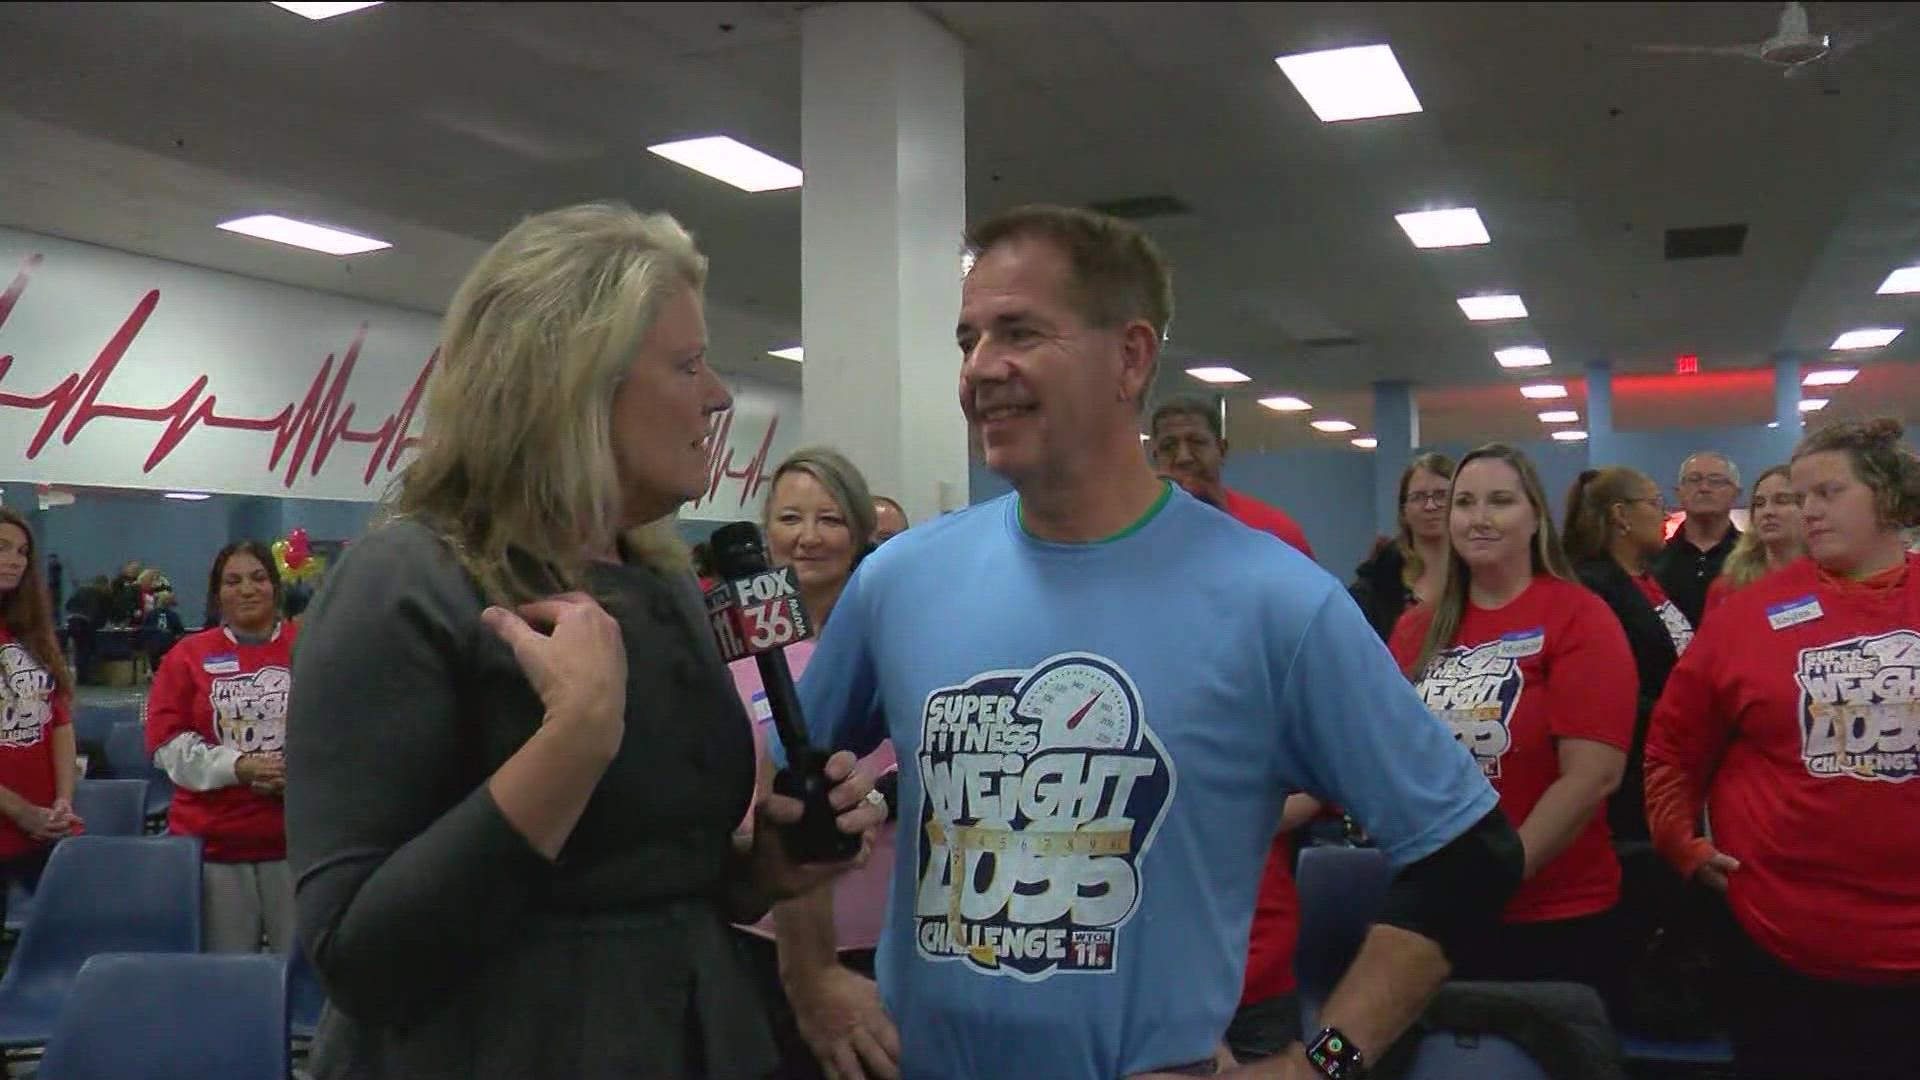 It's time to kick off another year of the Super Fitness Weight Loss Challenge! The party is on and begins with last year's champ Darryll Blausey offering advice.